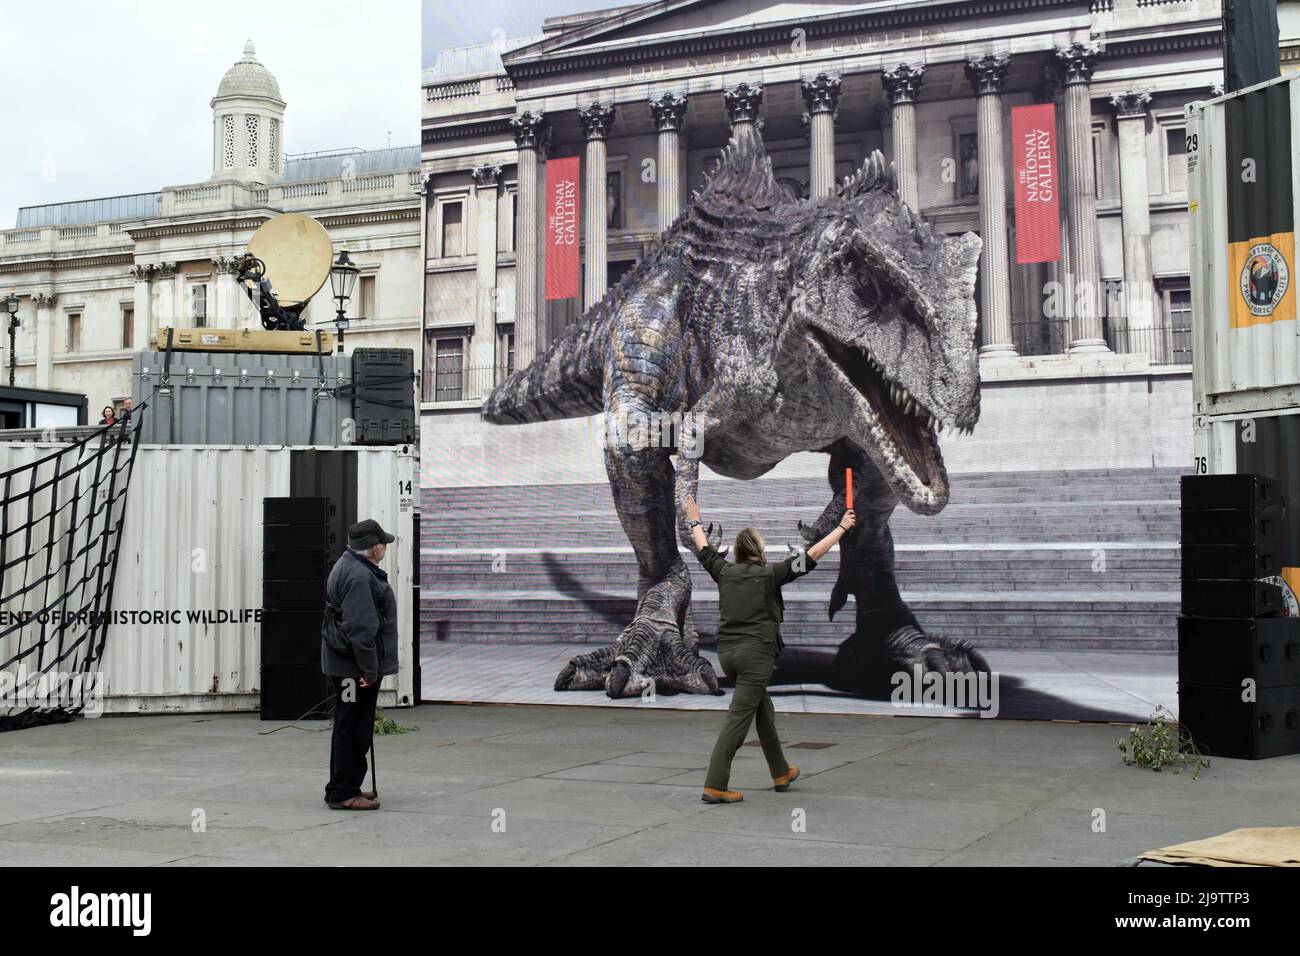 25th May, 2022. London, UK, A keeper controls the dinosaur. Jurassic World life size virtual reality dinosaur meets people on Trafalgar Square accompanied by the dinosaur's keeper.. The film comes to cinemas on June 10 2022. Tyrannosaurus rex (rex meaning 'king' in Latin), often called T. rex or colloquially T-Rex. Credit: JOHNNY ARMSTEAD/Alamy Live News Stock Photo